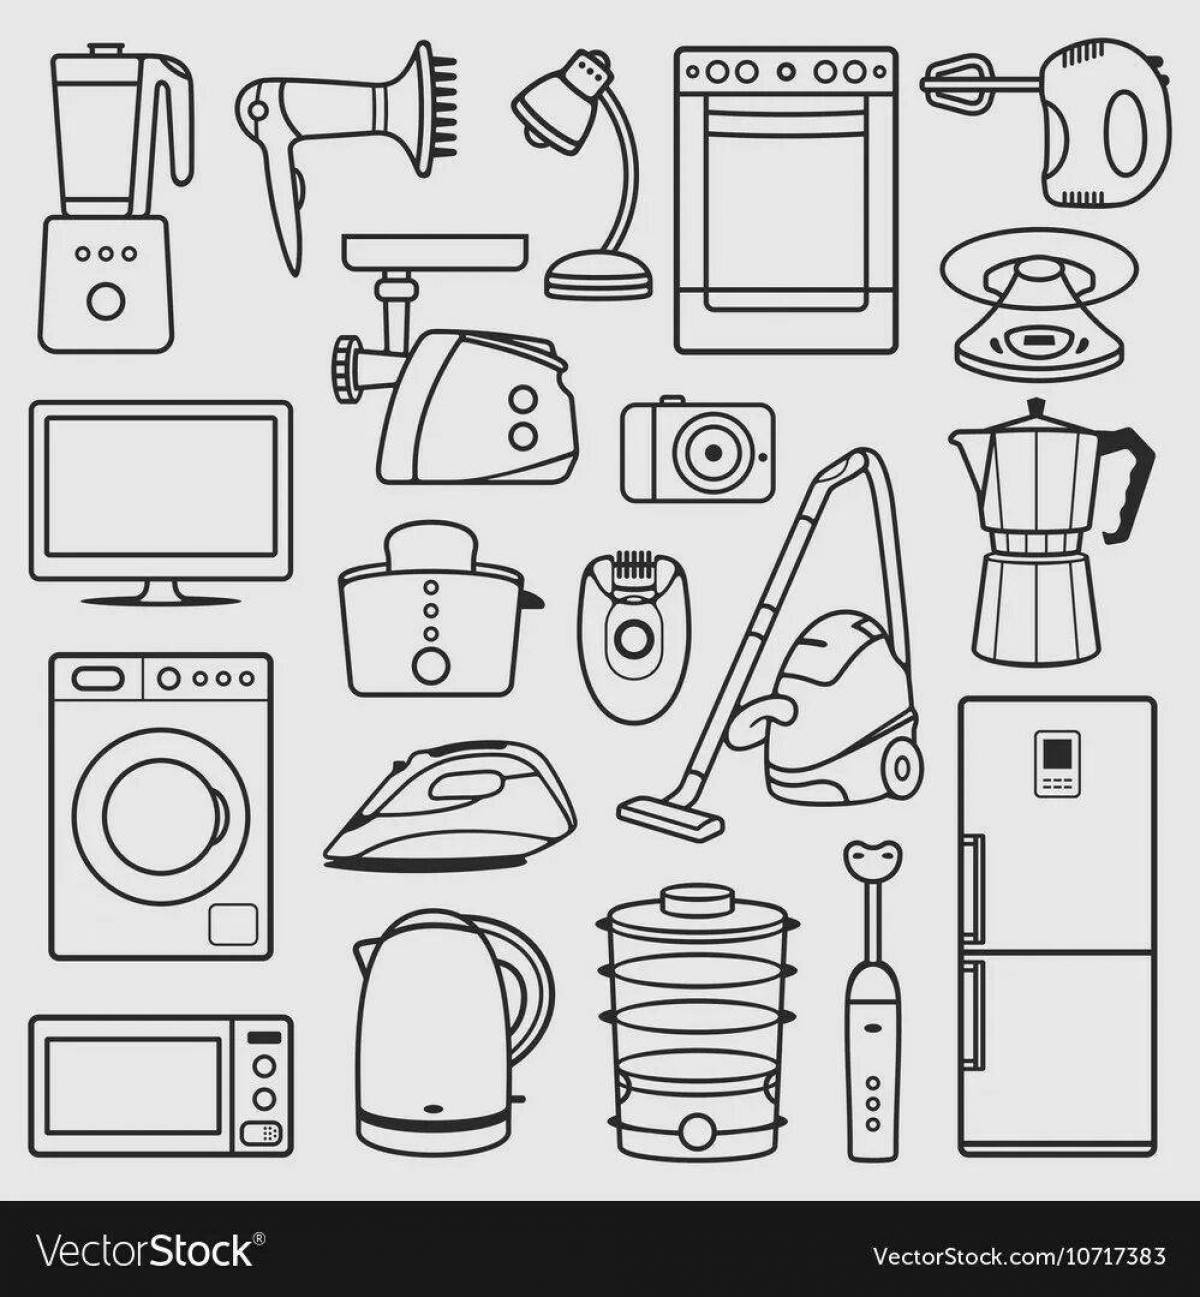 Home appliances in preparation group #2